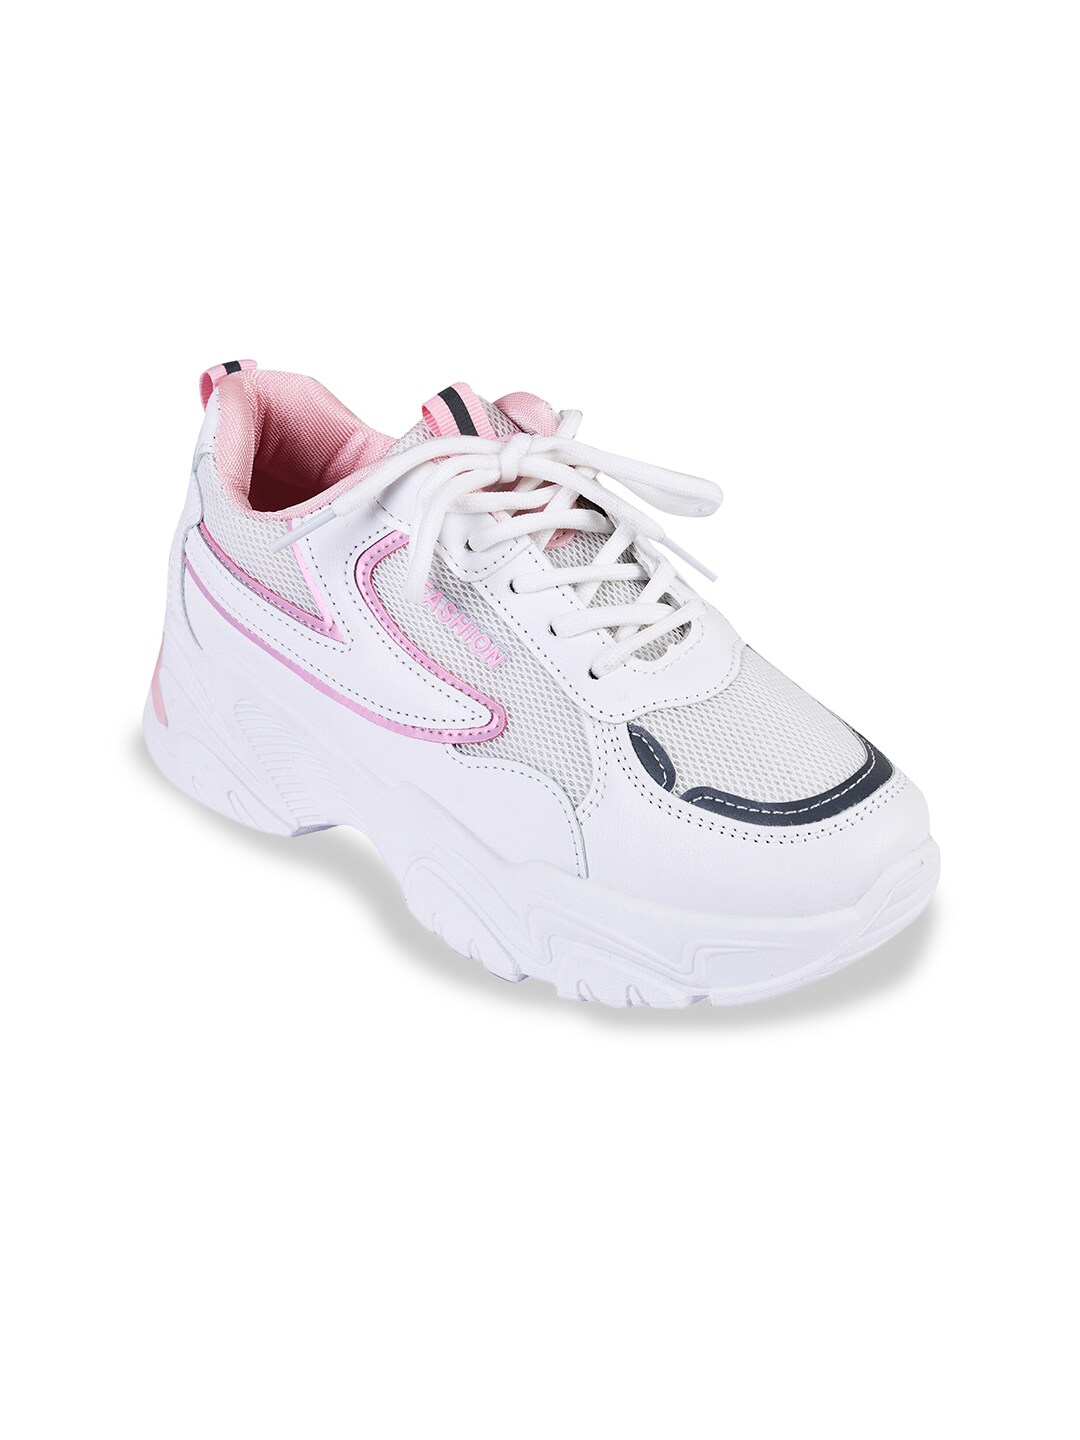 CASSIEY Women Pink Mesh Walking Shoes Price in India